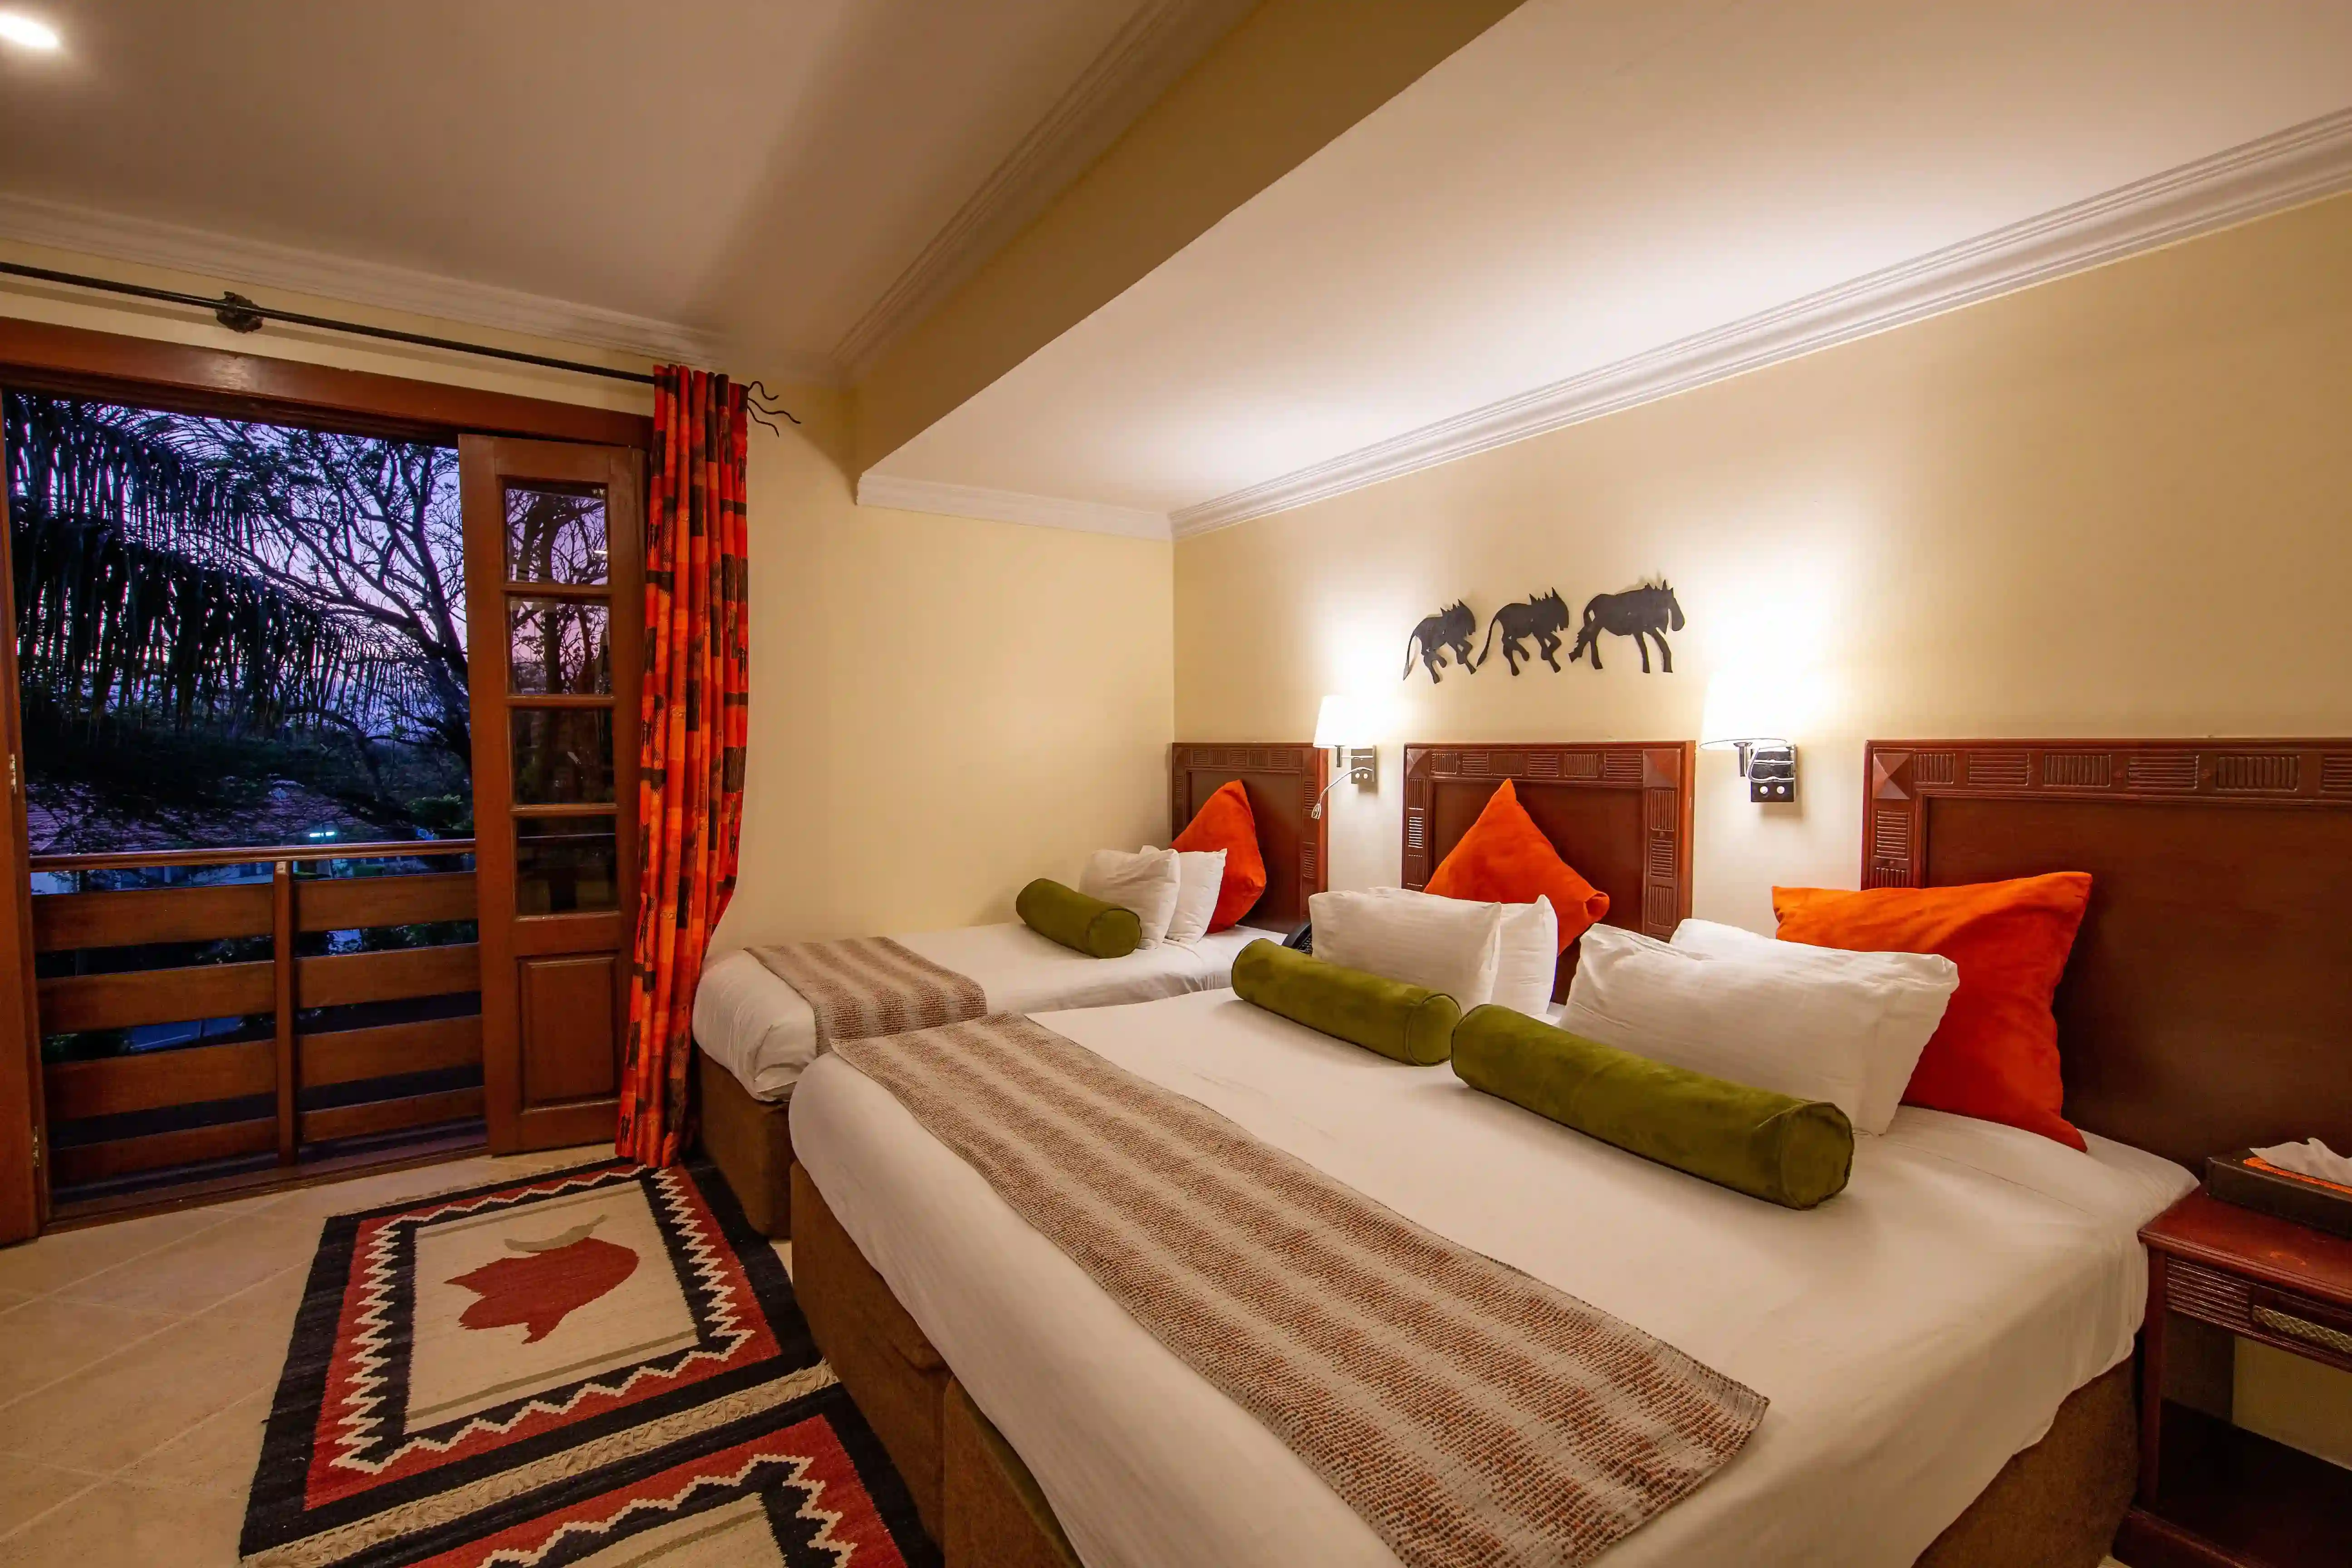 The African tulip double room